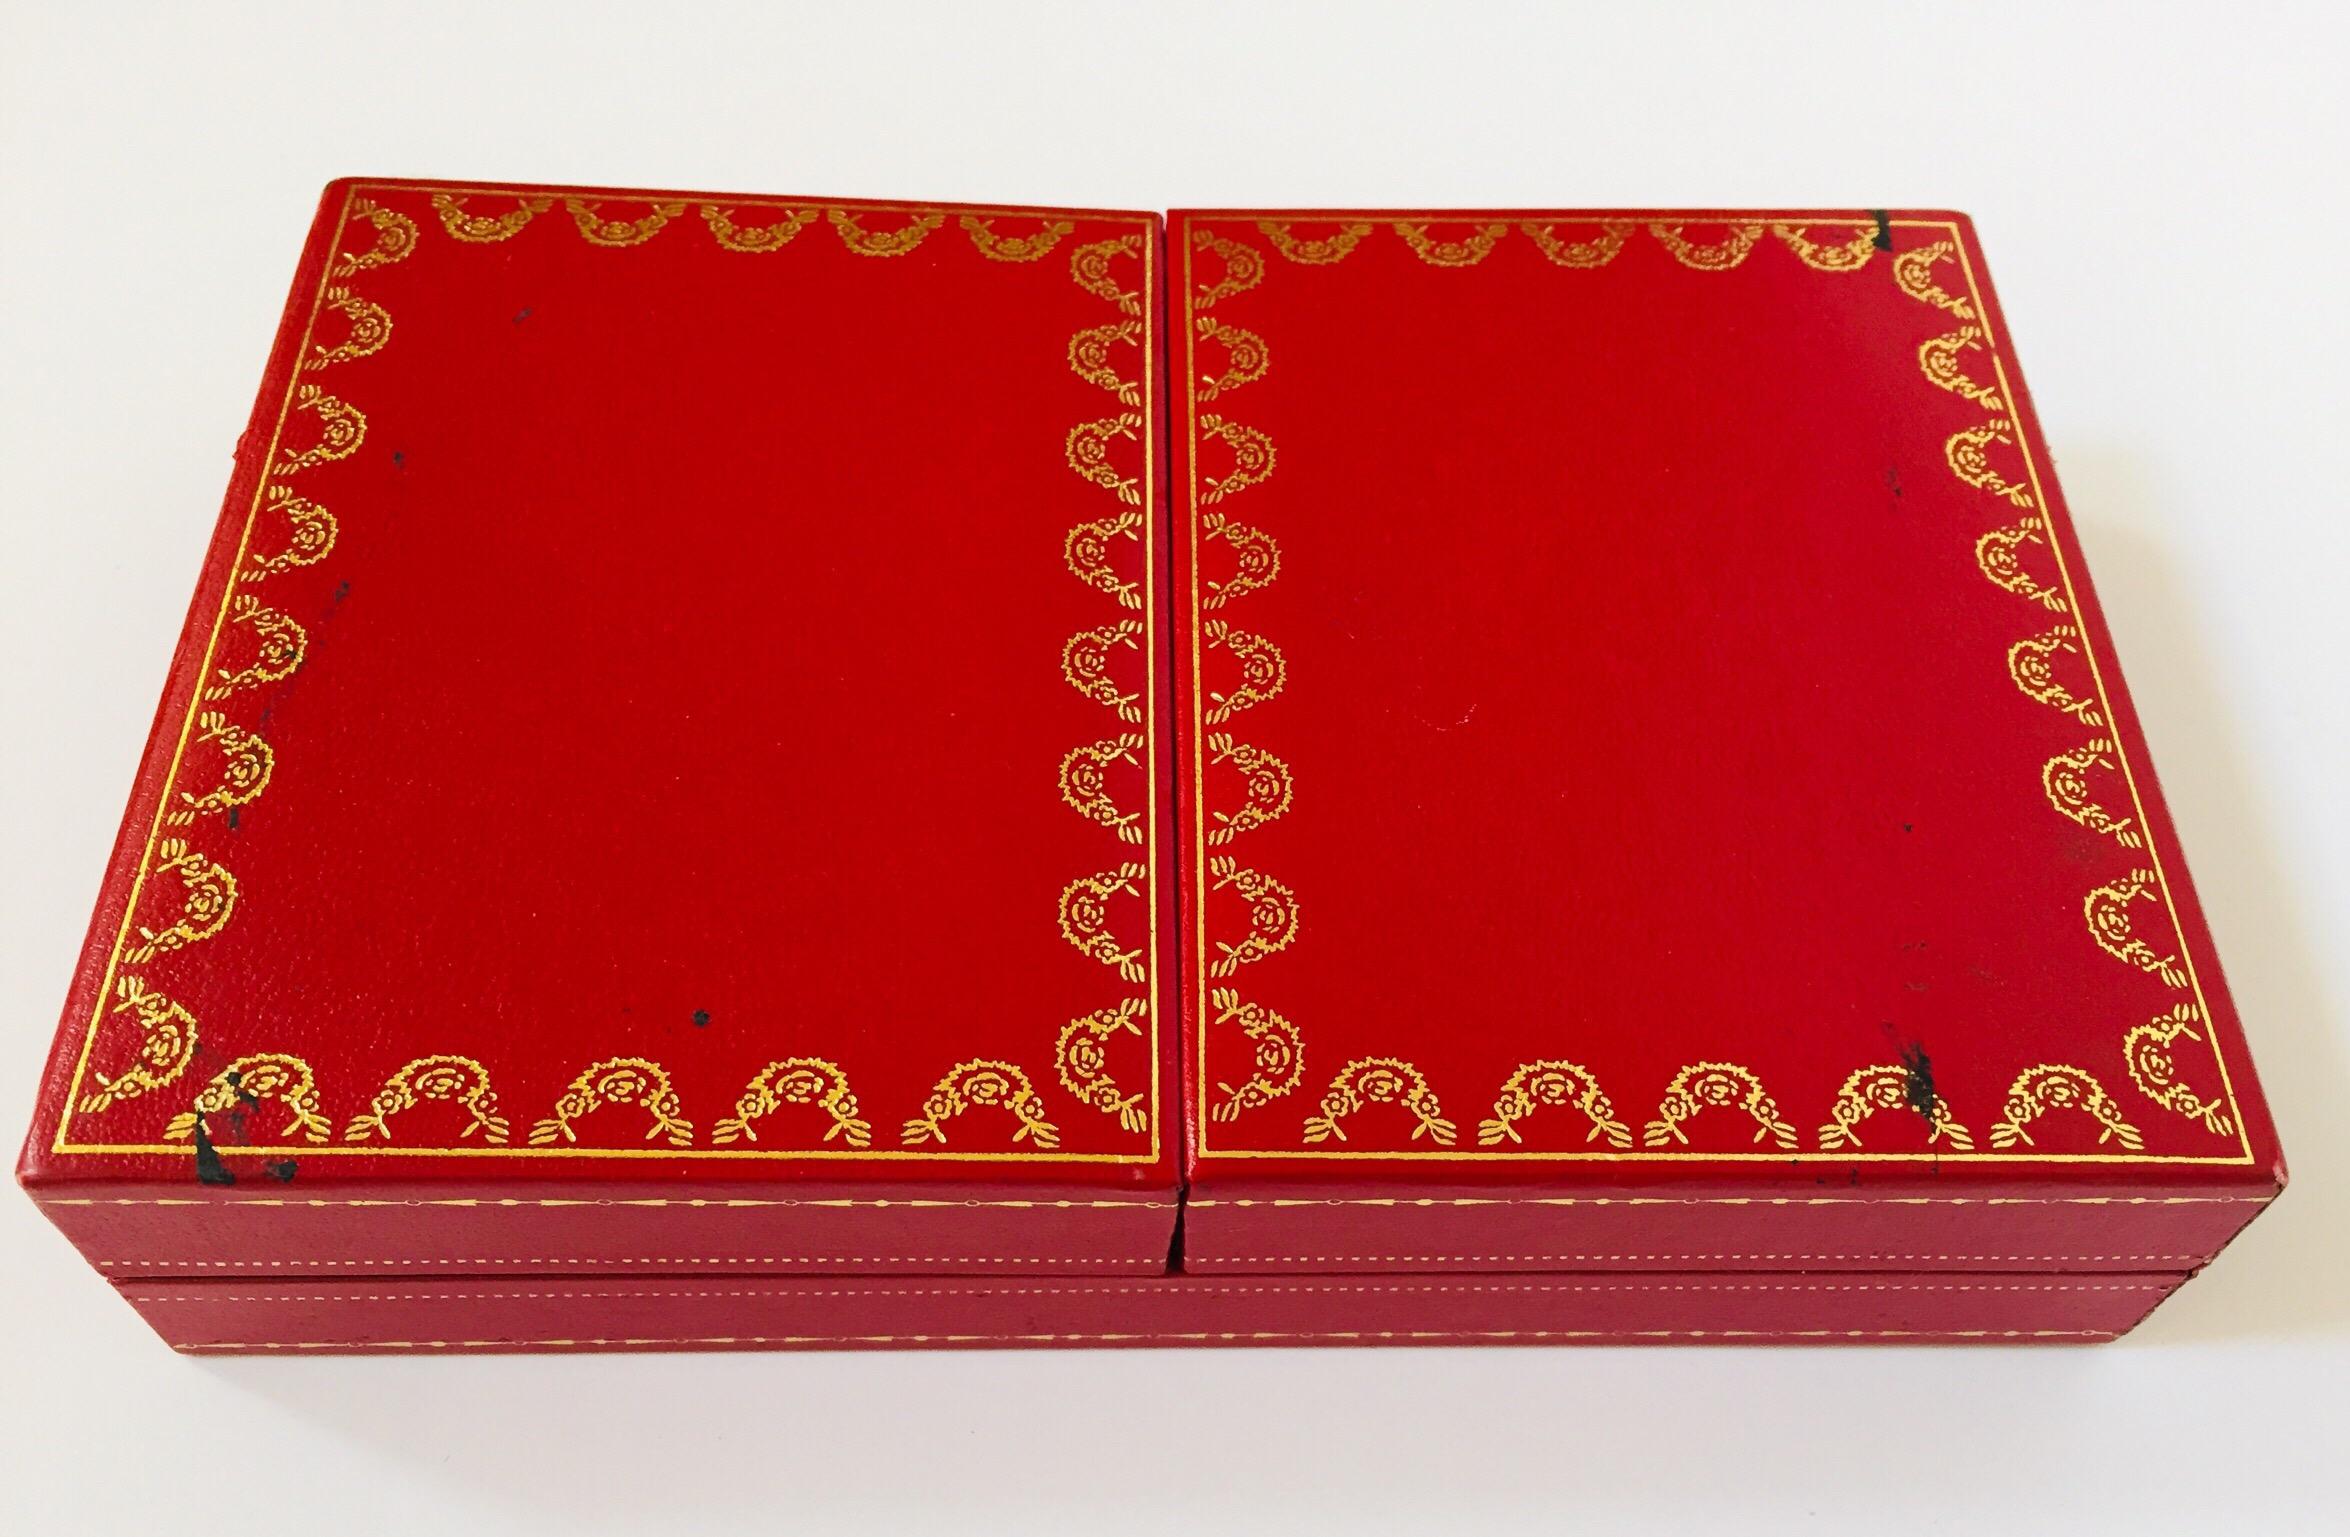 Must de Cartier Paris Vintage Playing Poker or Bridge Cards in Red Box 8